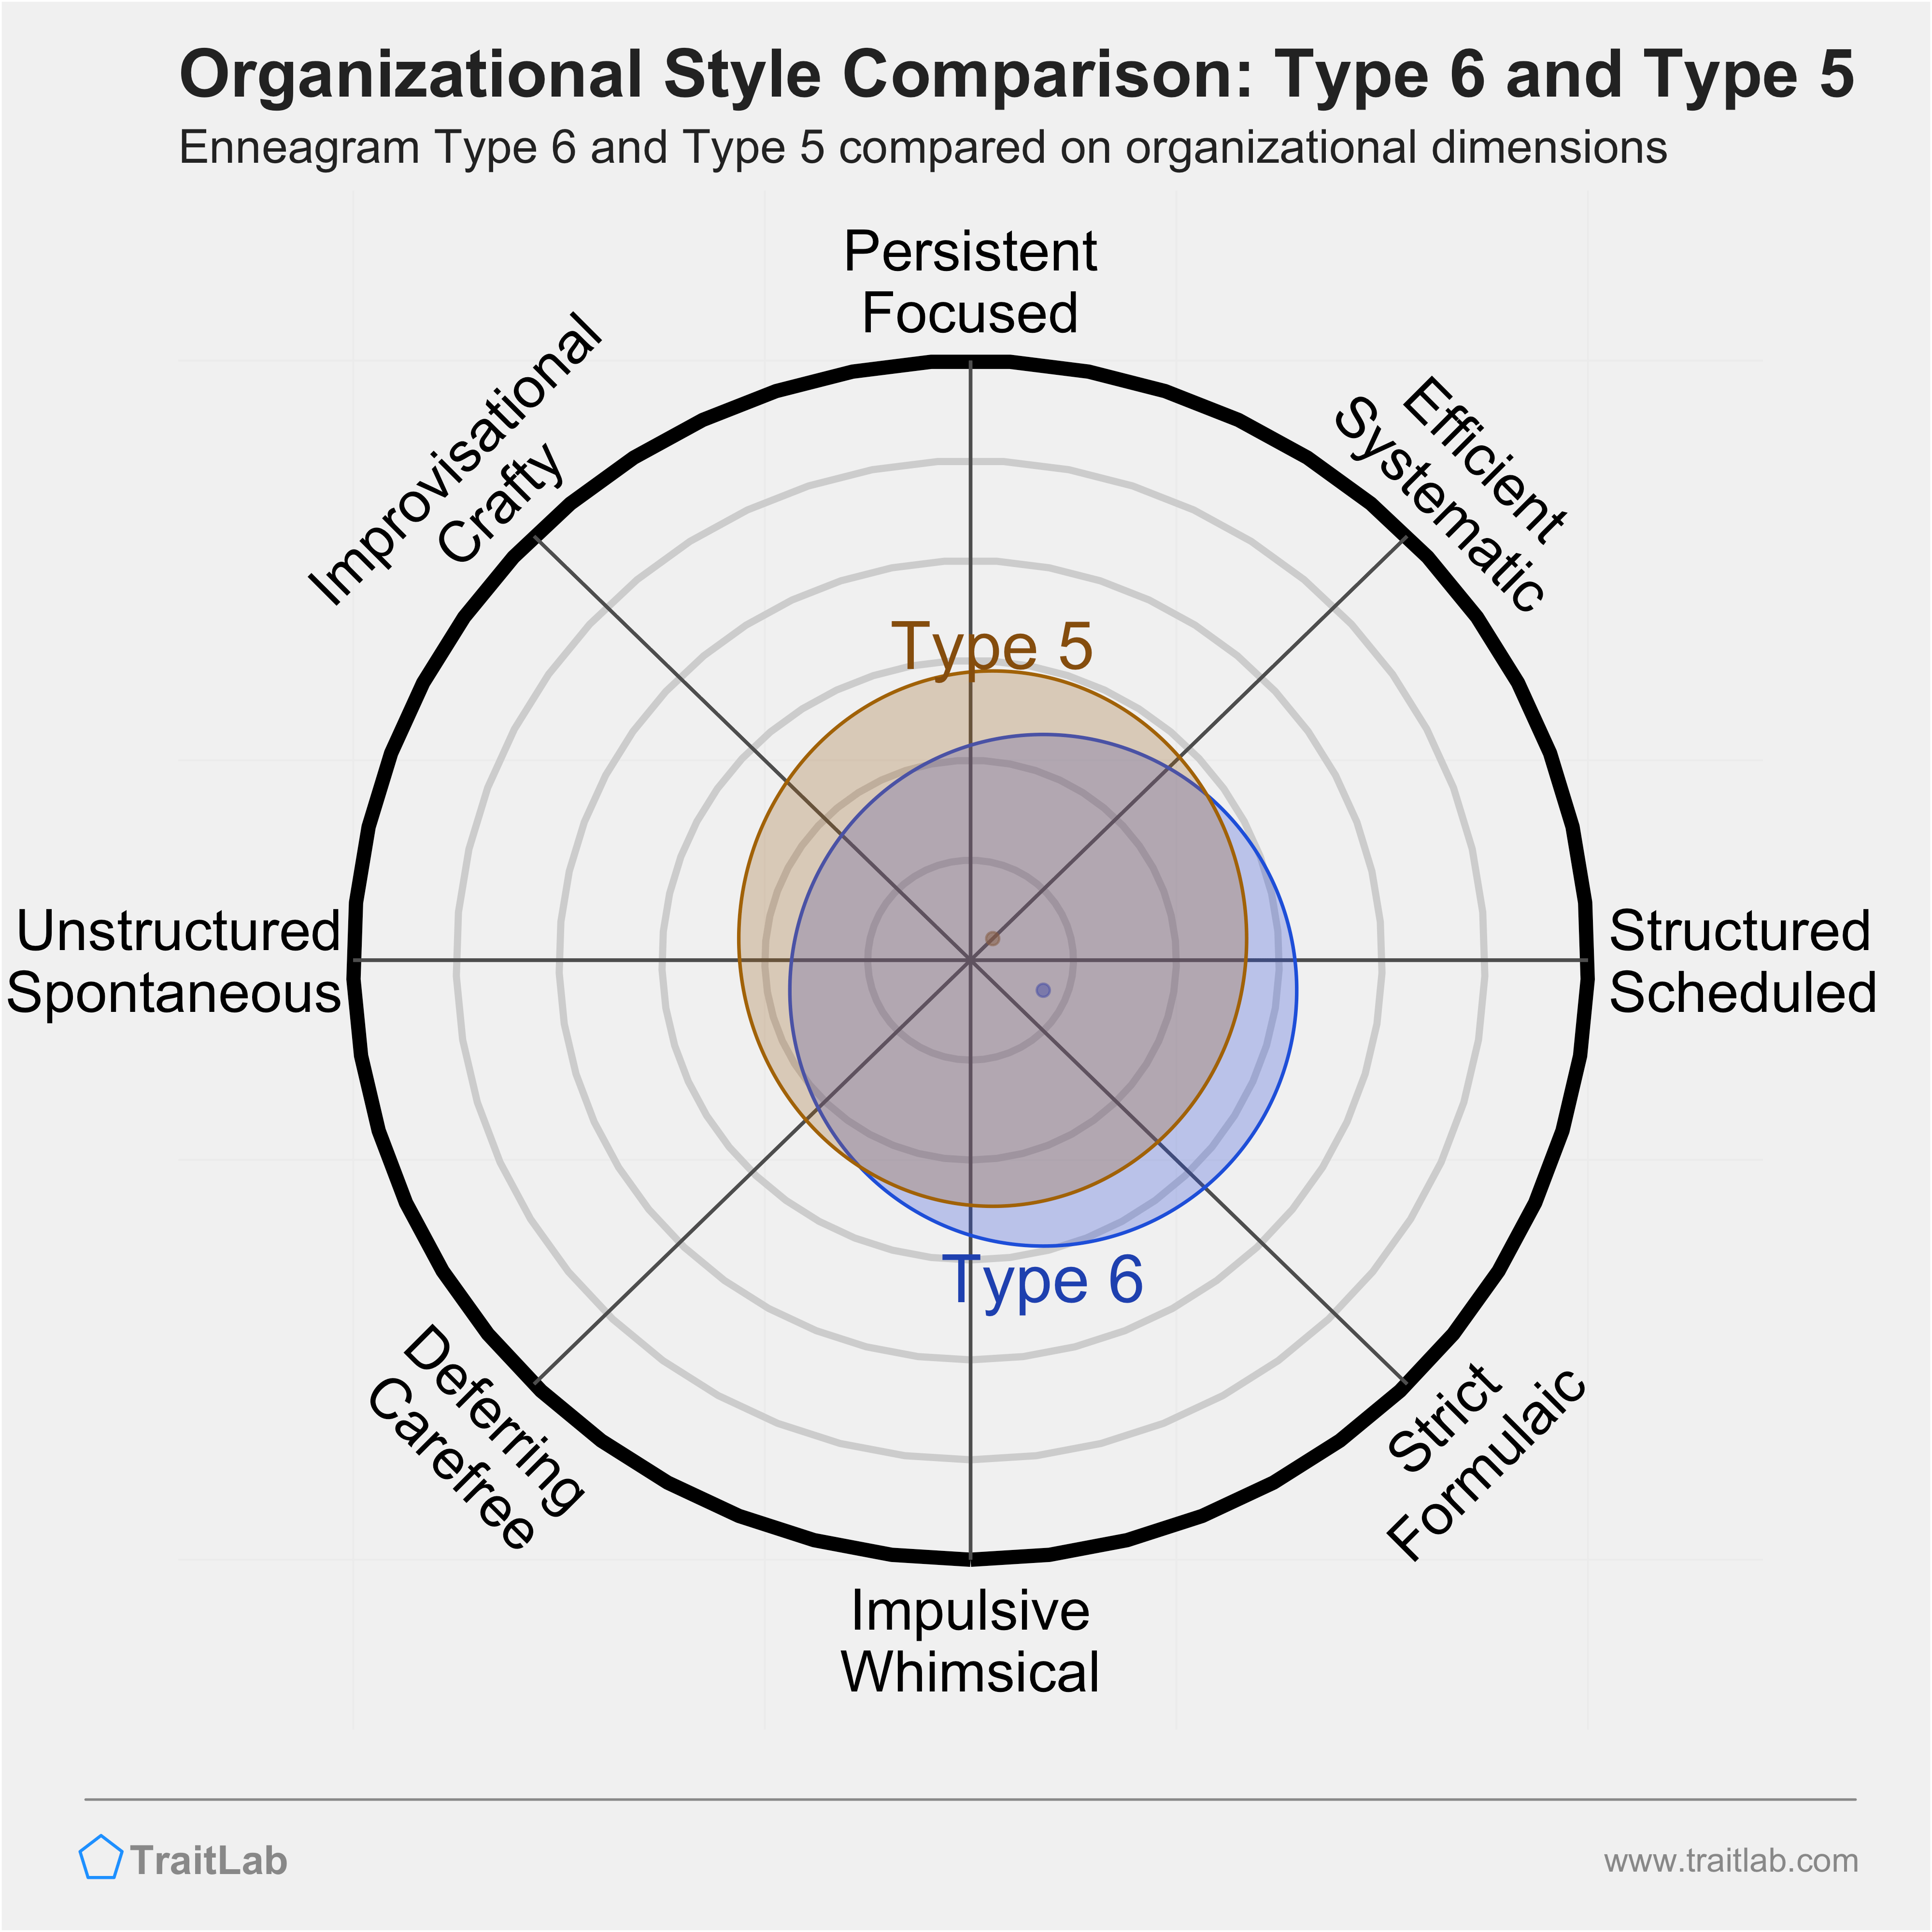 Type 6 and Type 5 comparison across organizational dimensions